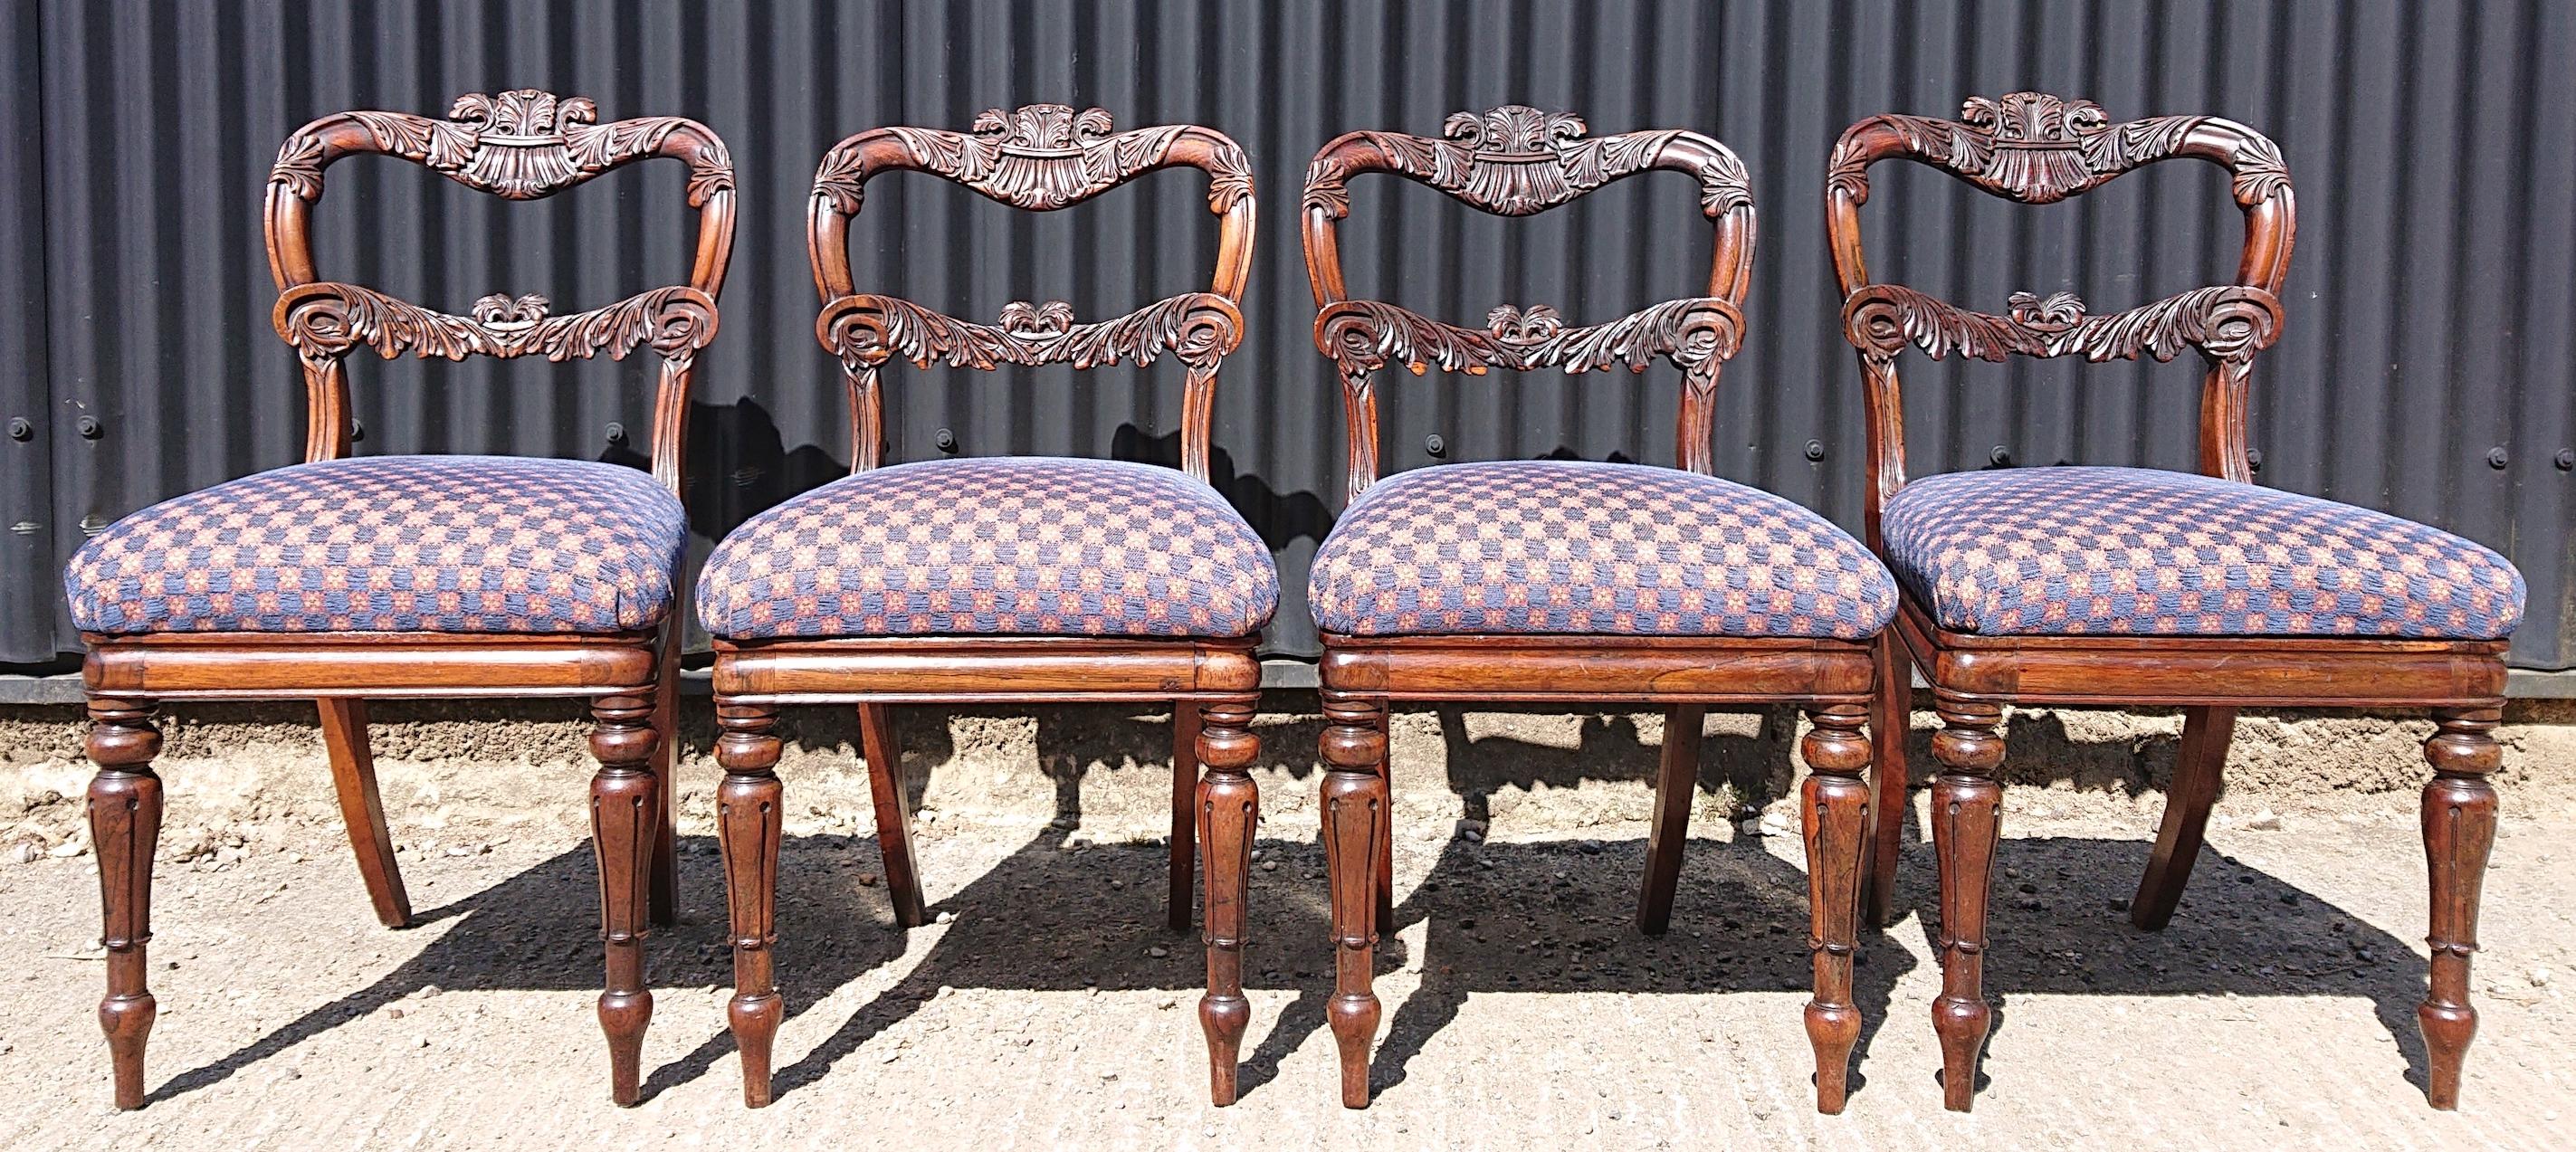 Set of Twelve 19th Century Dining Chairs in Goncales Alves by Gillow For Sale 4